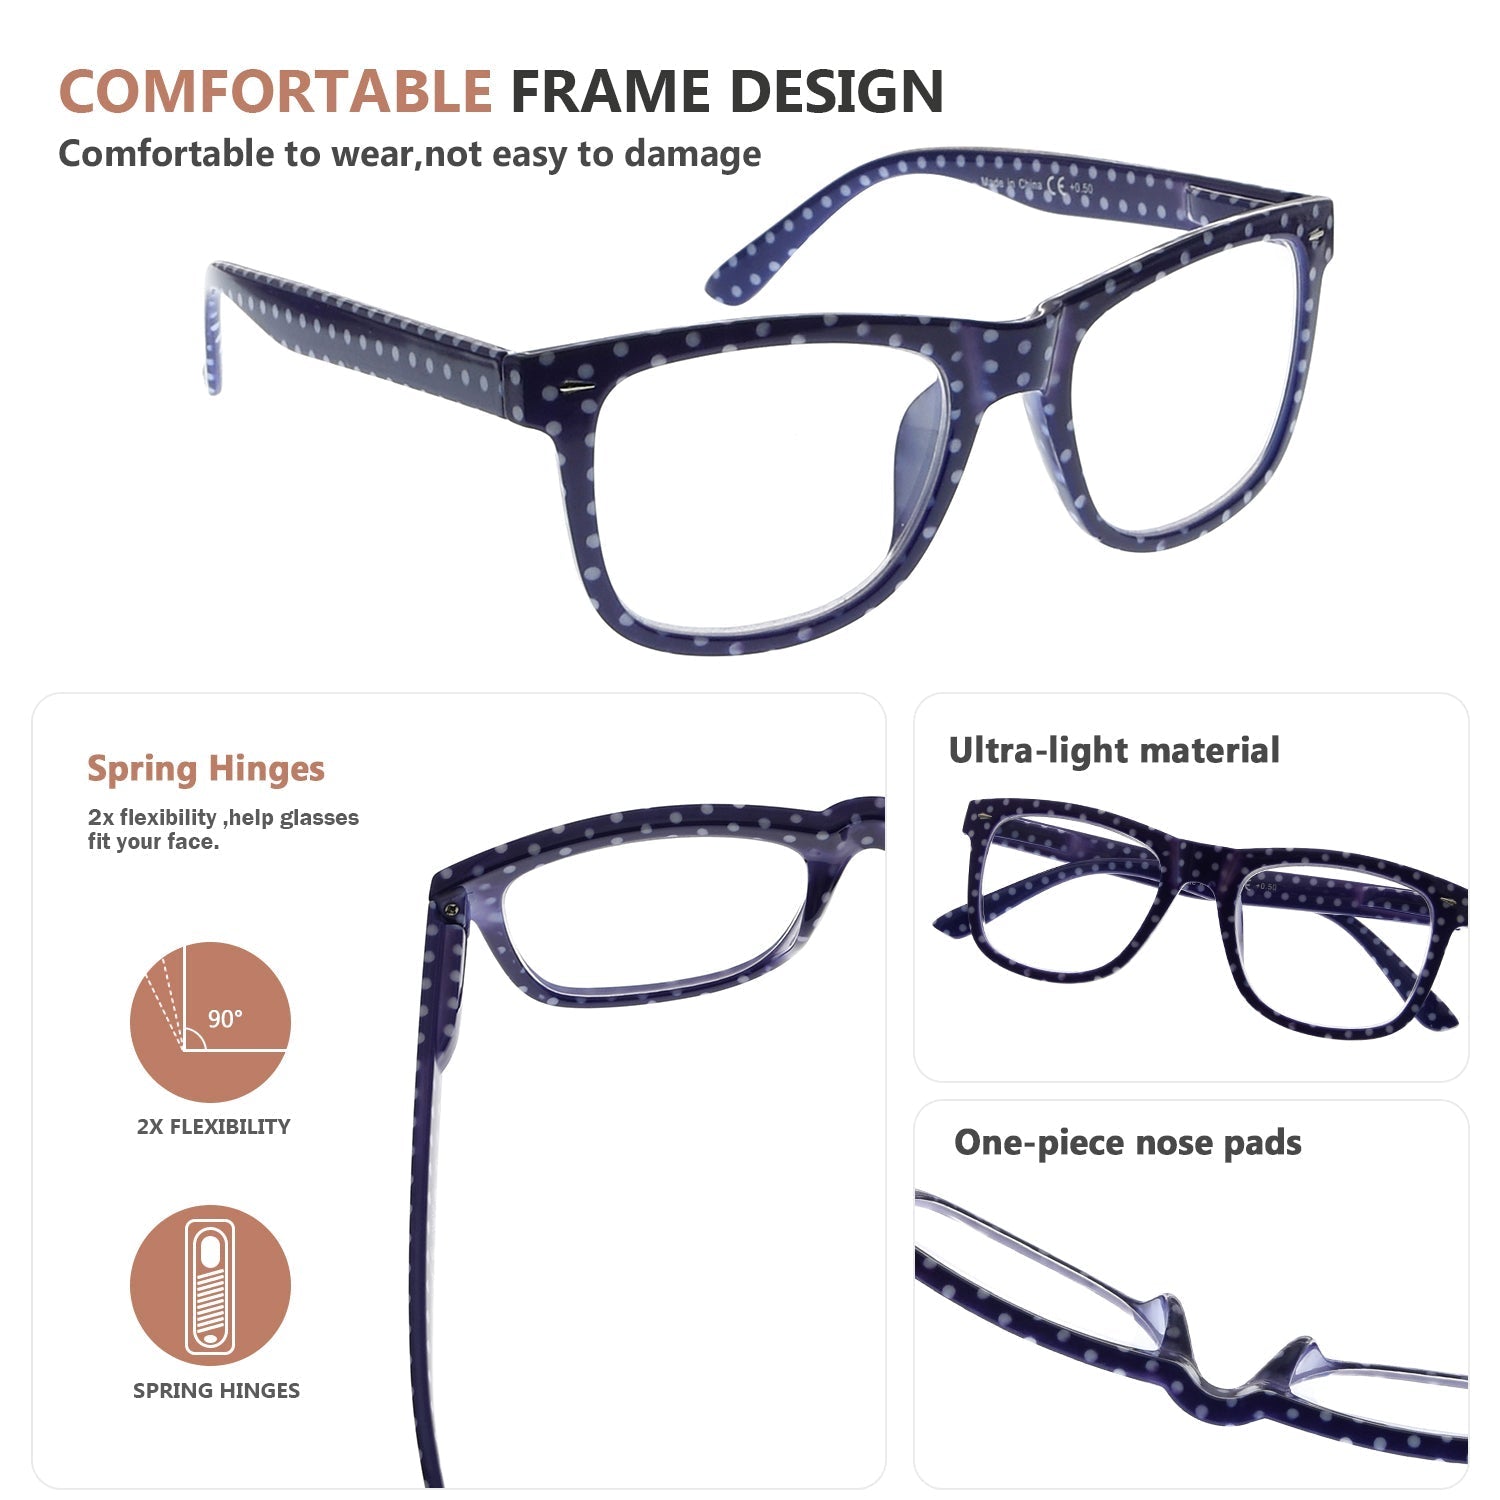 4 Pack Classic Polka Dots Reading Glasses for Women R080P